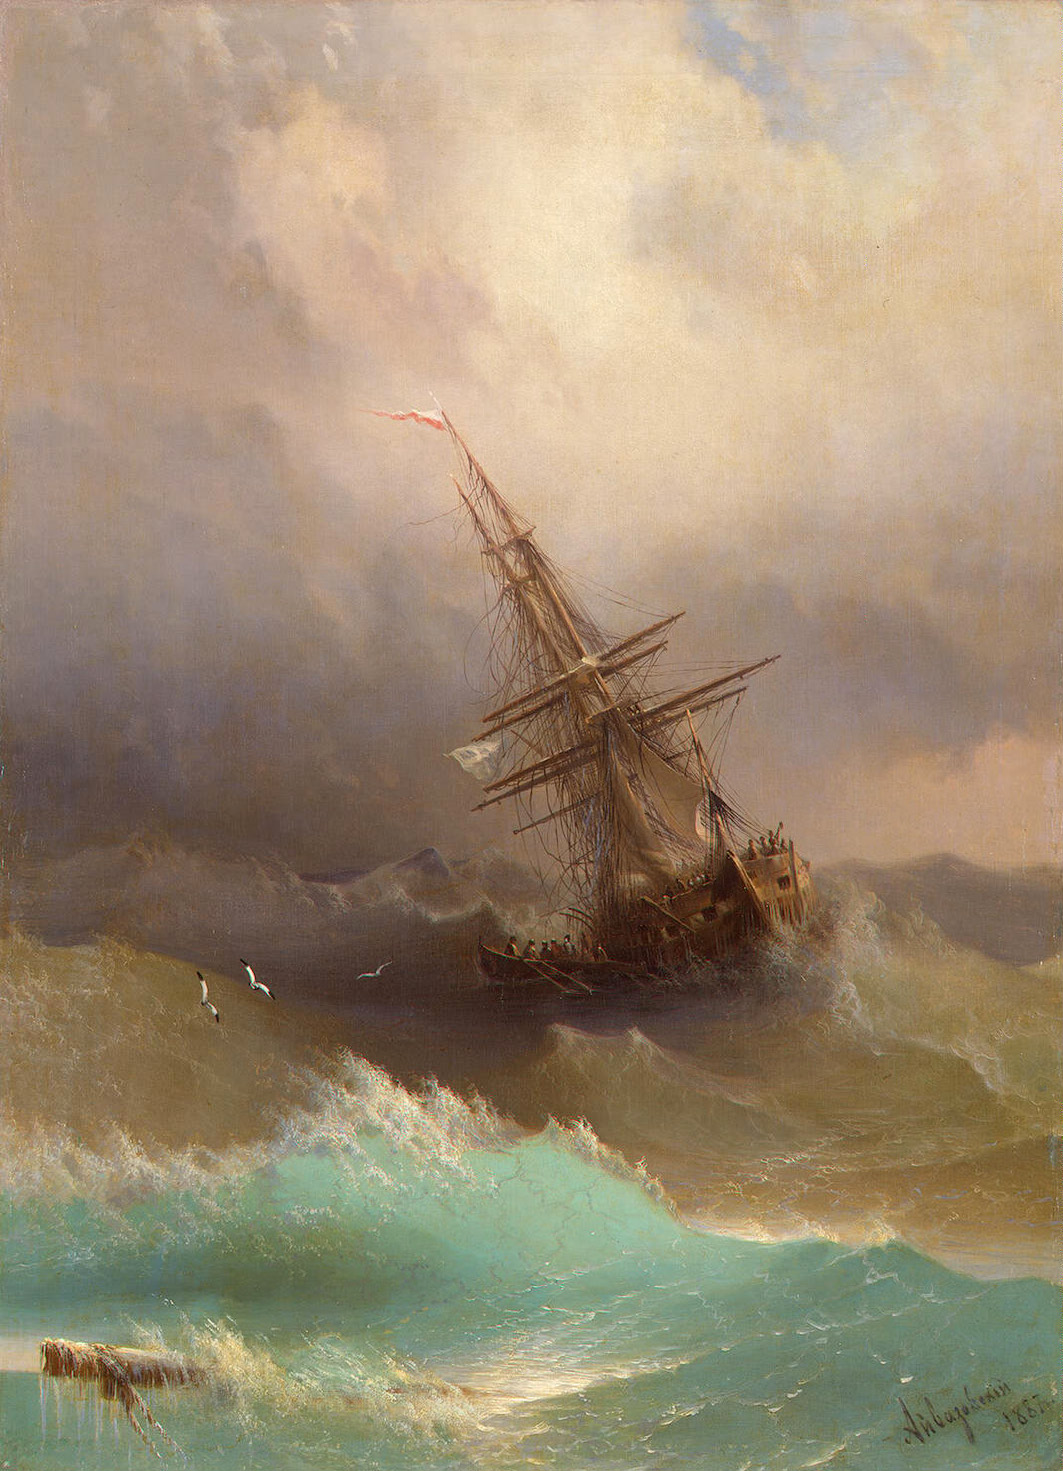 Ship in the Stormy Sea (1887).